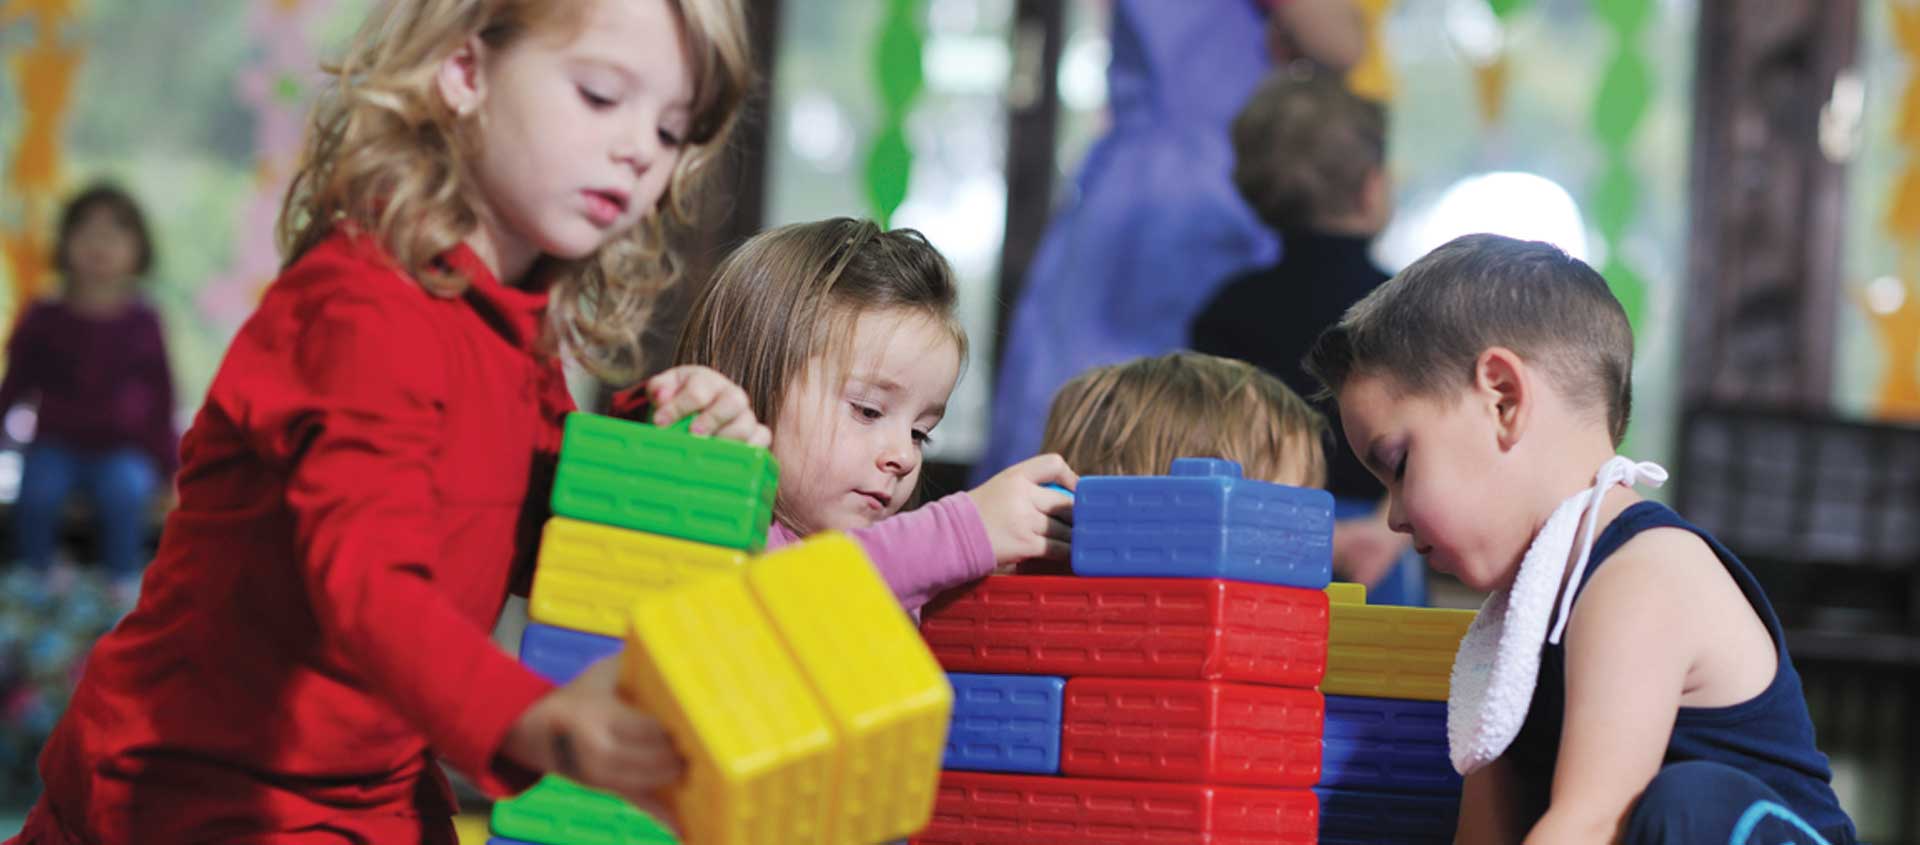 Preschool-aged children build with blocks in a day care setting